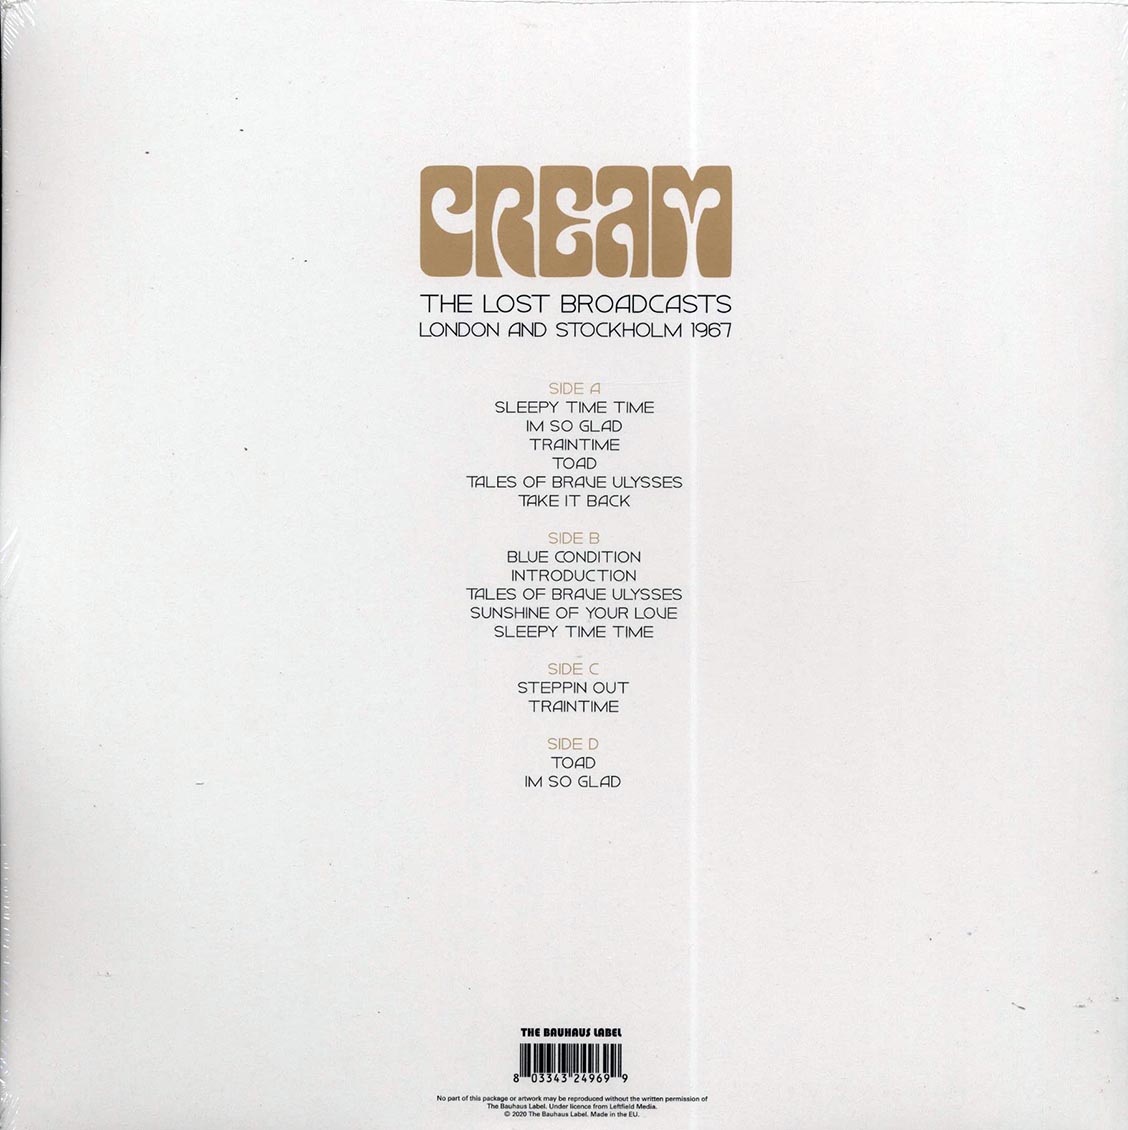 Cream - The Lost Broadcasts: London And Stockholm 1967